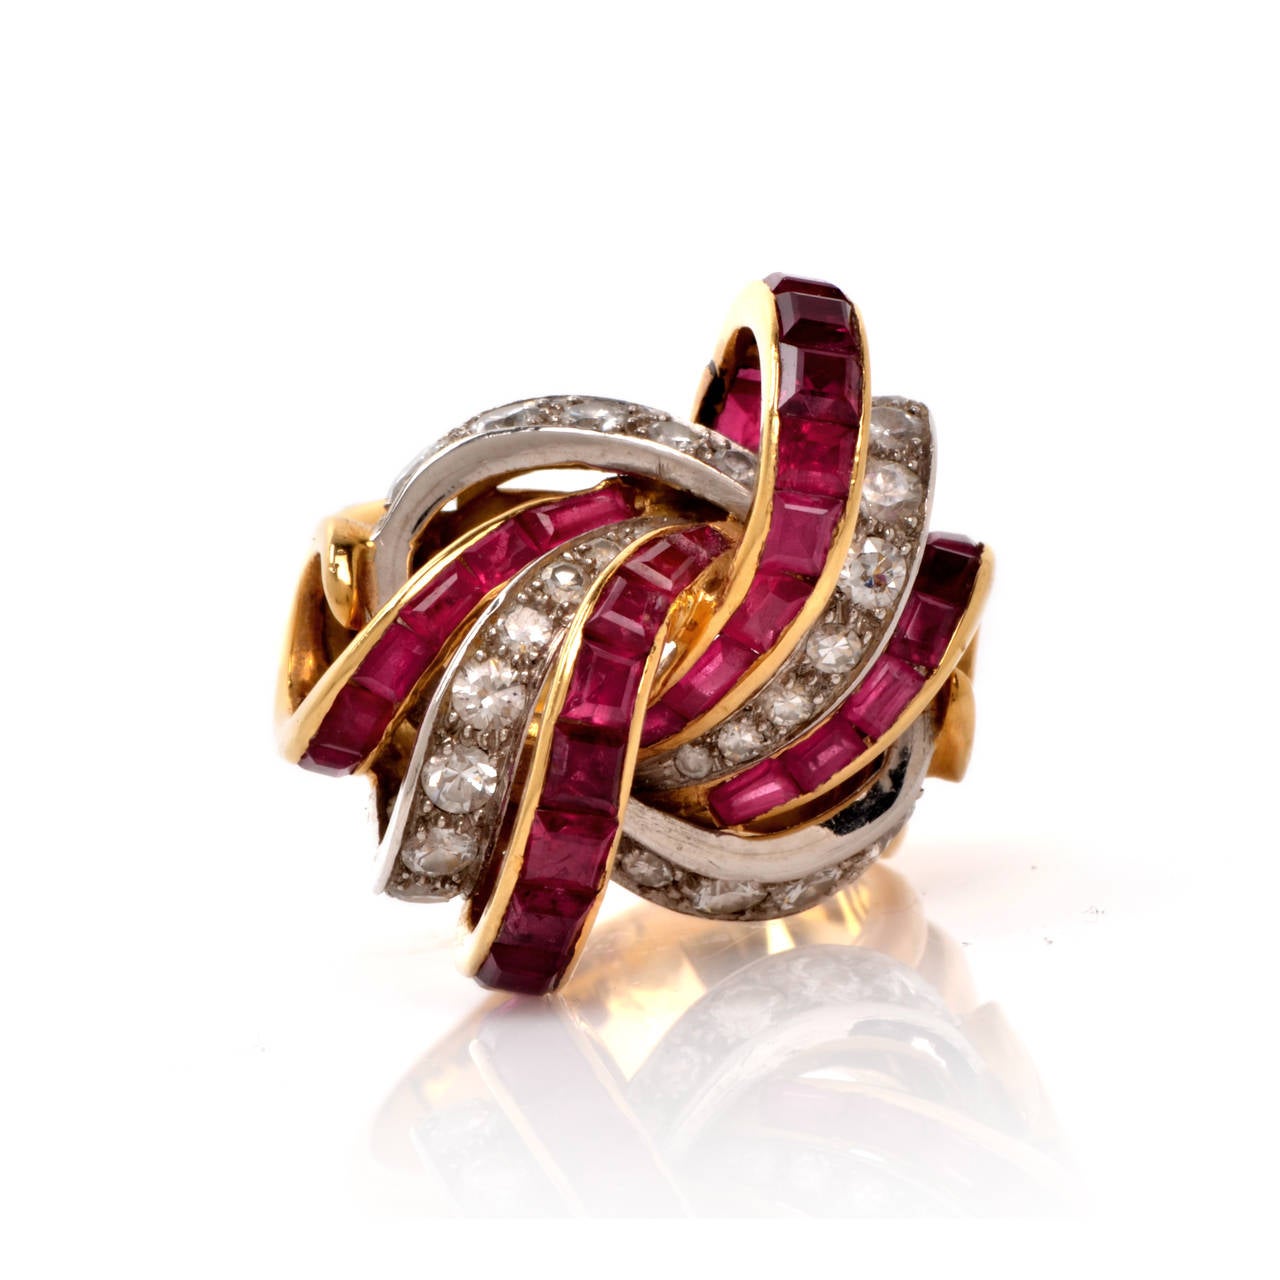 This authentic Retro cocktail French ring with diamonds and rubies is crafted in a combination of solid 18K yellow gold and solid platinum, weighing app.  18.2 grams and measuring app. 13mm high. Depicting the quintessential characteristics of the